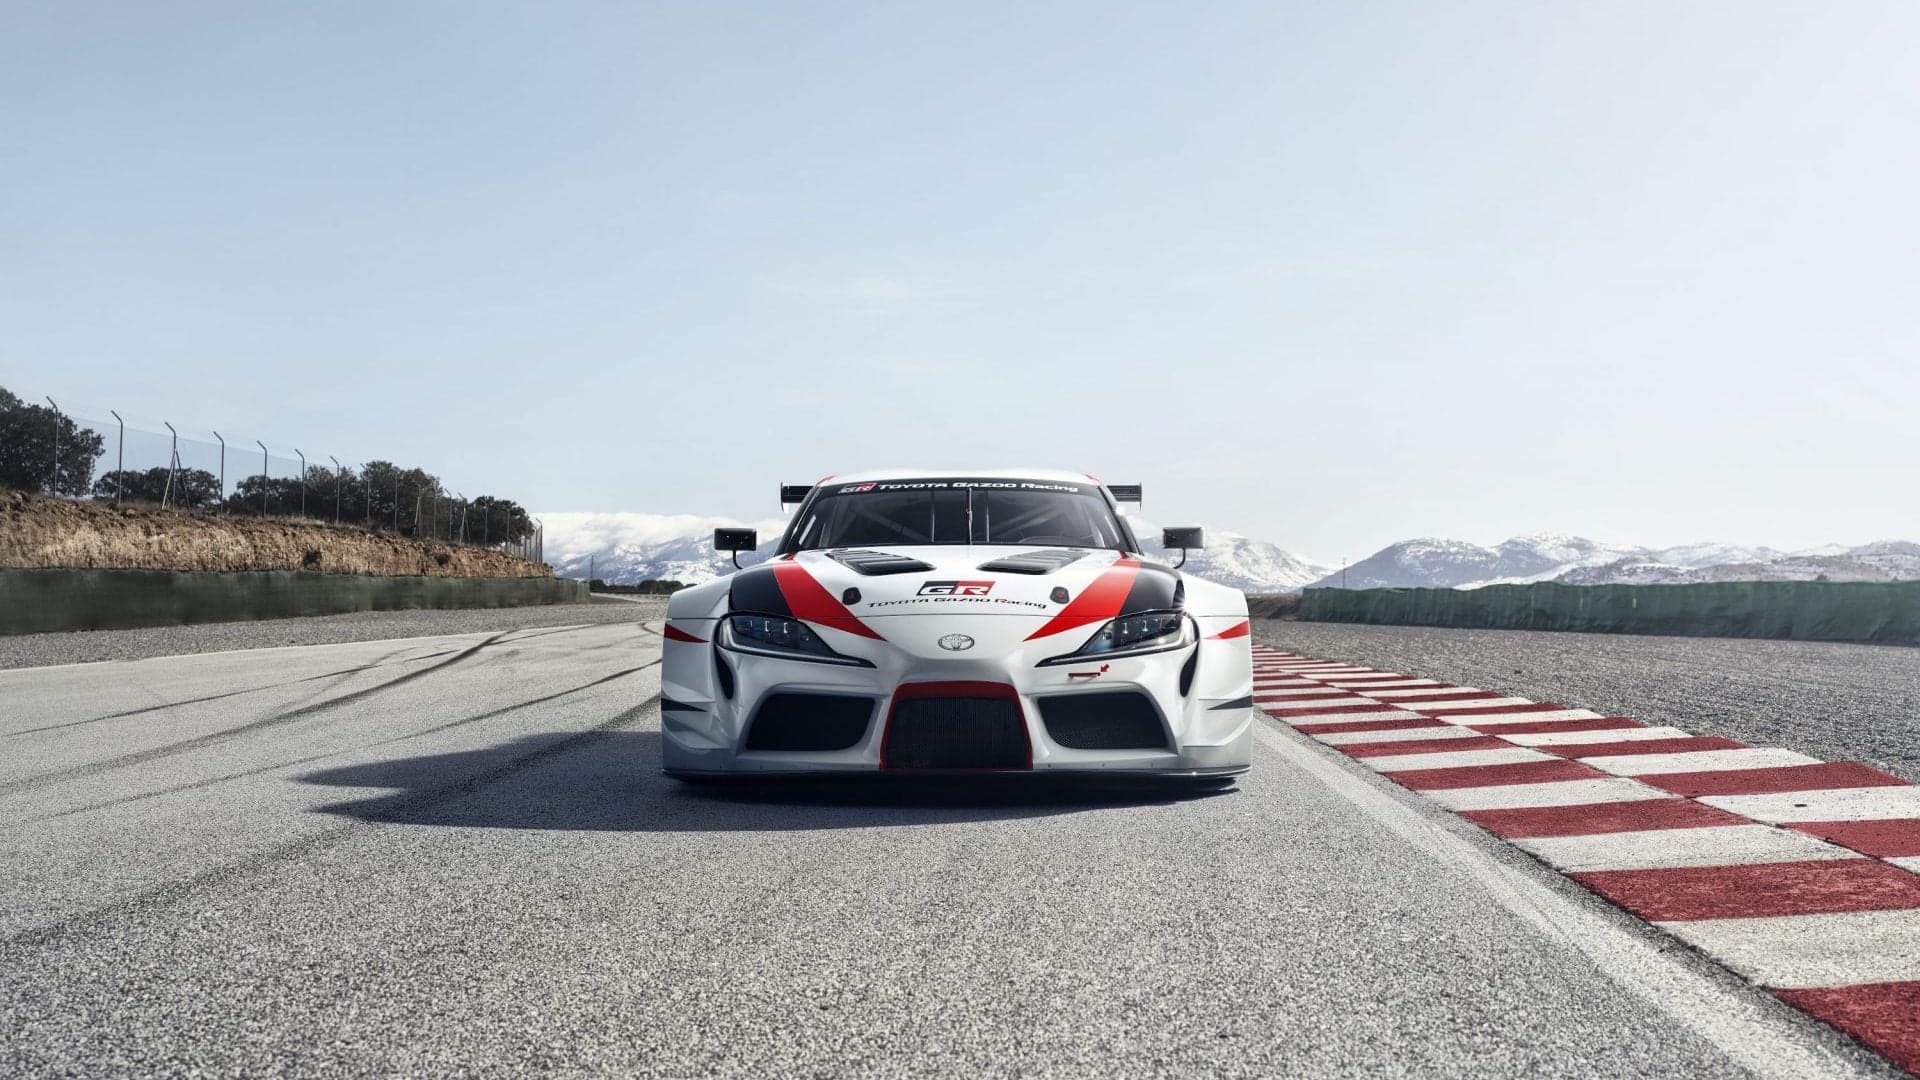 Here’s the New Toyota Supra in a Racing Suit